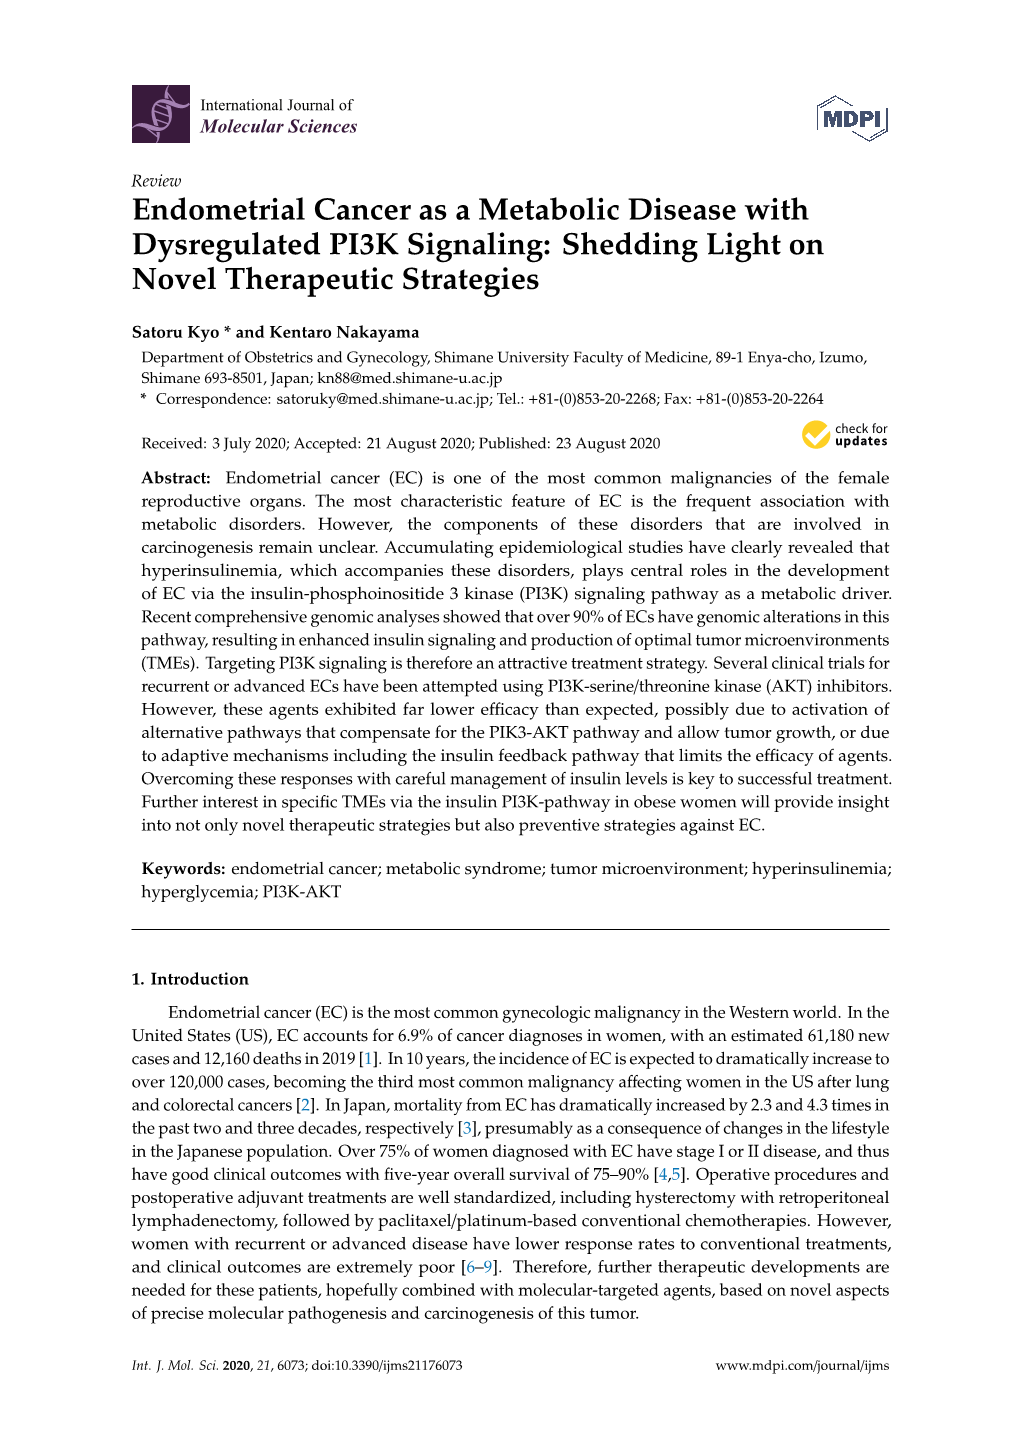 Endometrial Cancer As a Metabolic Disease with Dysregulated PI3K Signaling: Shedding Light on Novel Therapeutic Strategies